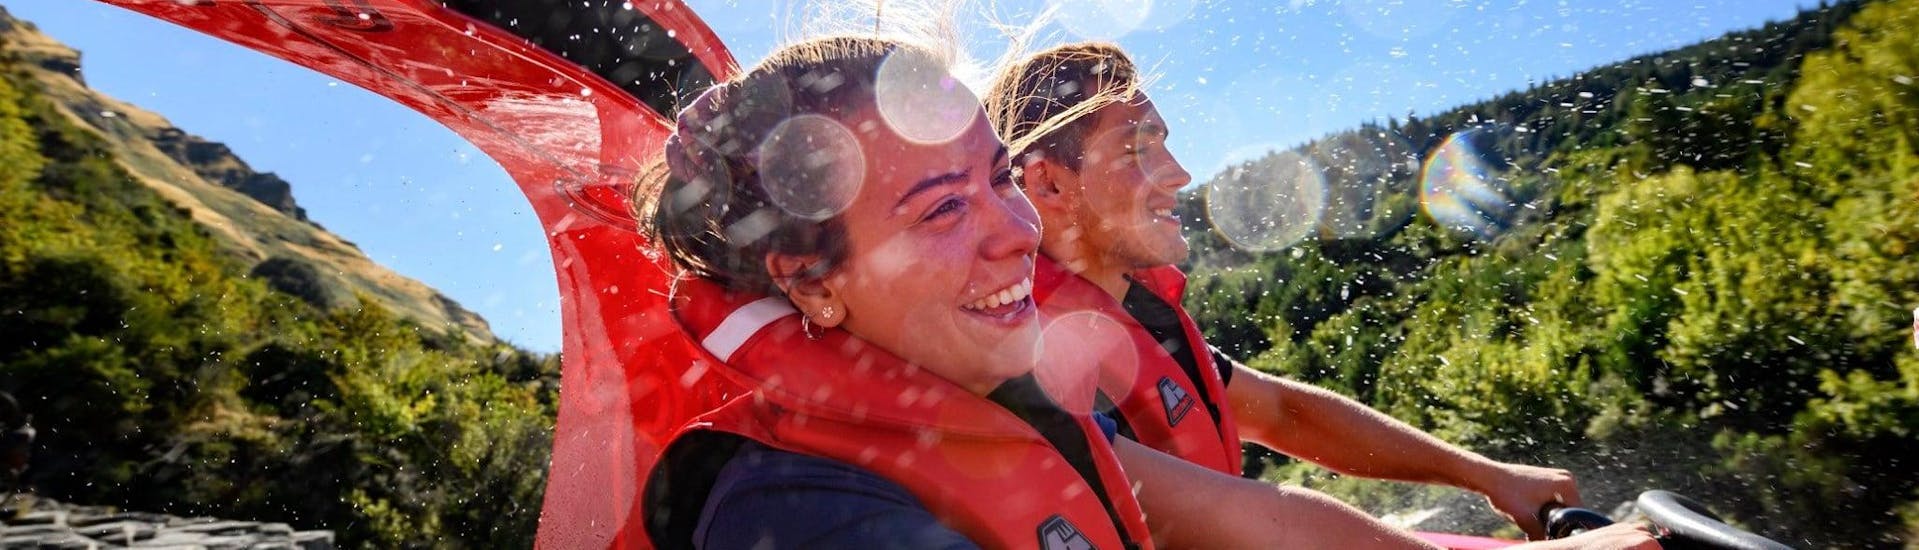 People have fun on the boat during the tour organized by Shotover Jet Queenstown.